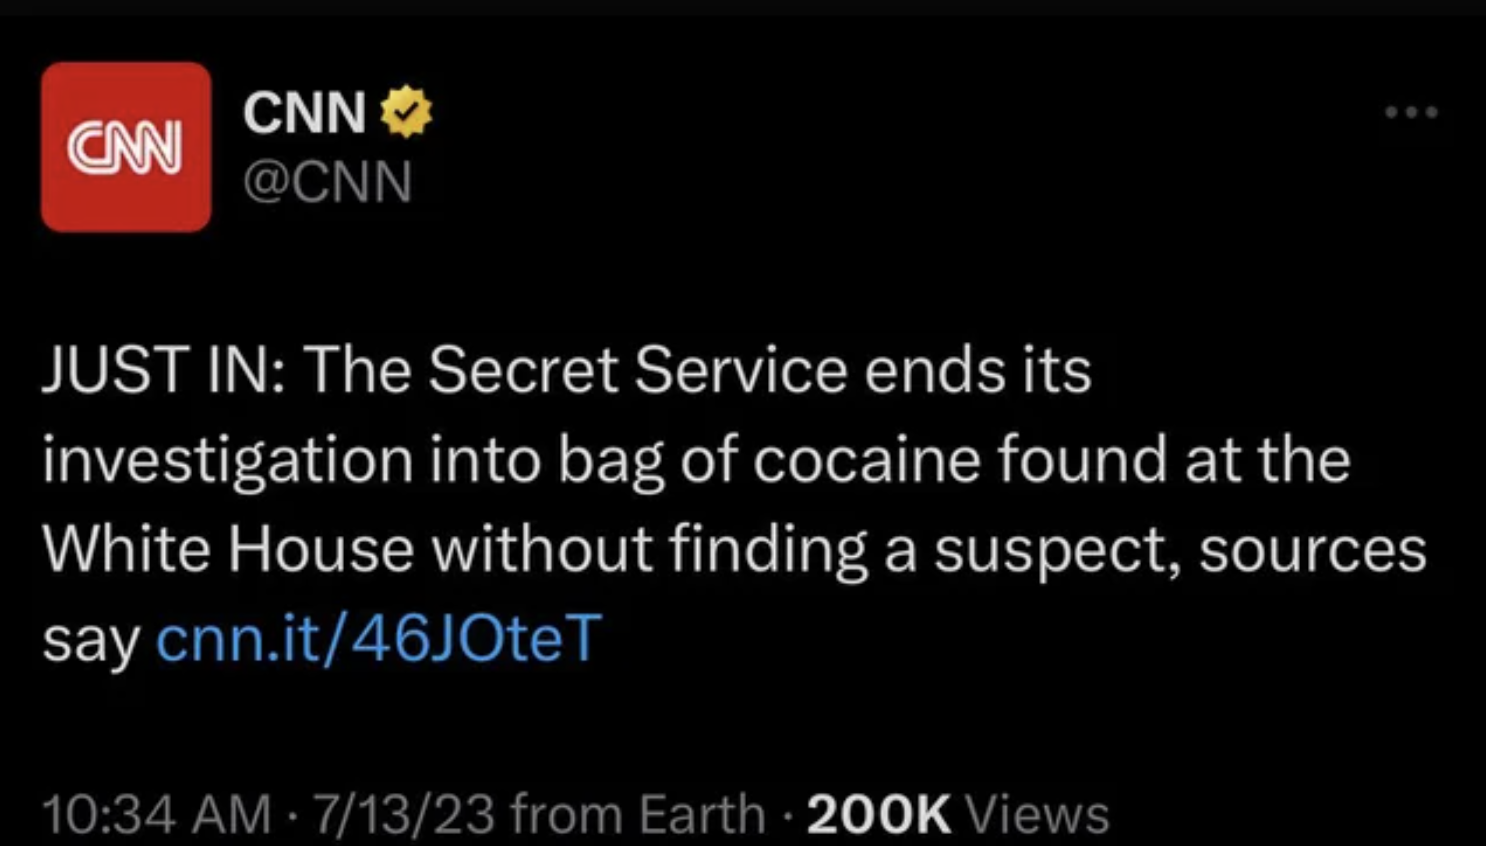 Can Cnn Just In The Secret Service ends its investigation into bag of cocaine found at the White House without finding a suspect, sources say cnn.it46JOteT 71323 from Earth Views